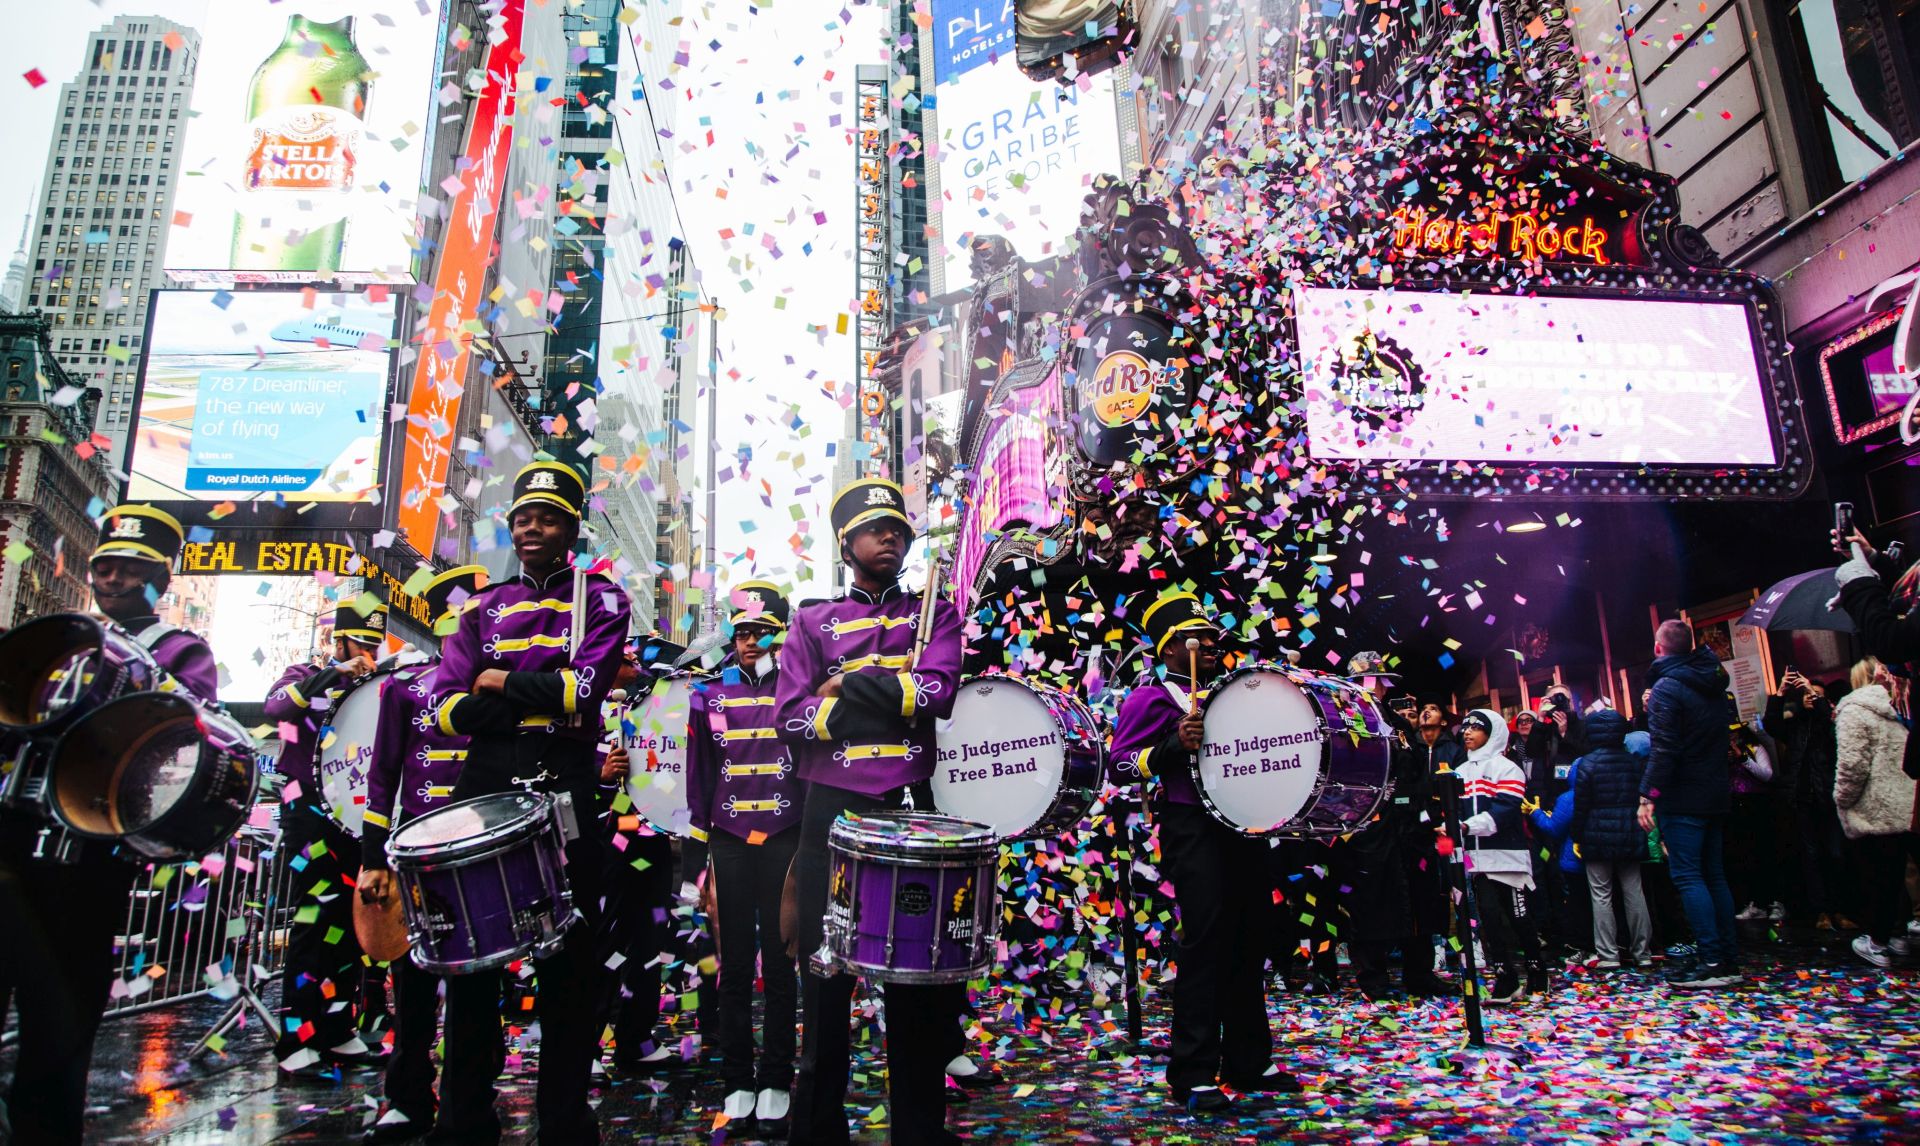 epa05690941 New York City-based Marching Cobras band, welcome the handfuls of confetti that are thrown as a test before New Year Eve from the Hard Rock Cafe marquee in Times Square, New York, New York, USA, 29 December 2016. The colorful event is held in preparation for the release of confetti at midnight on New Year's Eve that will include pieces with wishes from individuals who have submitted them at the New Year's Eve Wishing Wall in Times Square.  EPA/ALBA VIGARAY